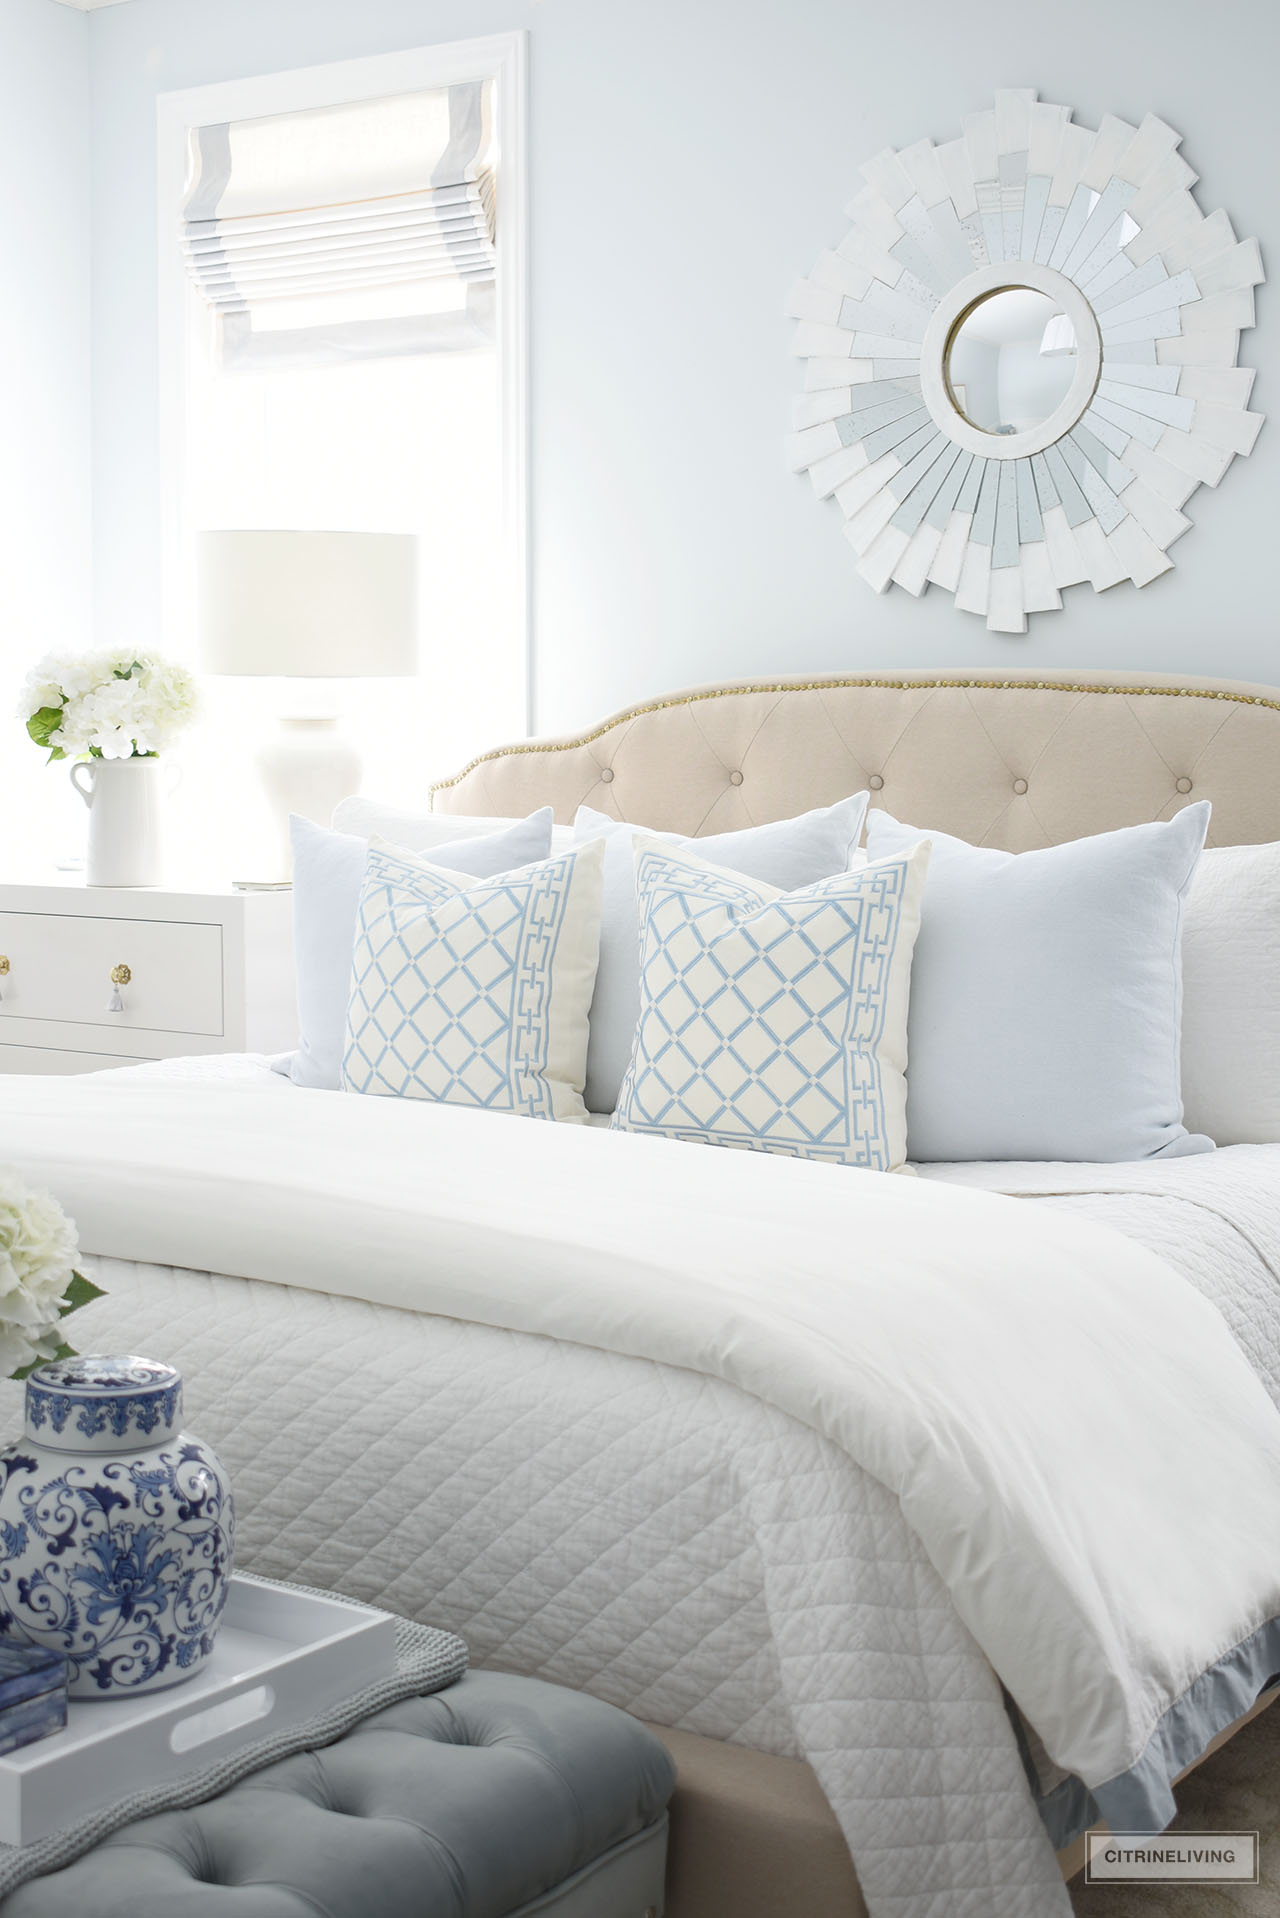 Beautiful bed layered with soft blue and white throw pillows and quilted bedding.